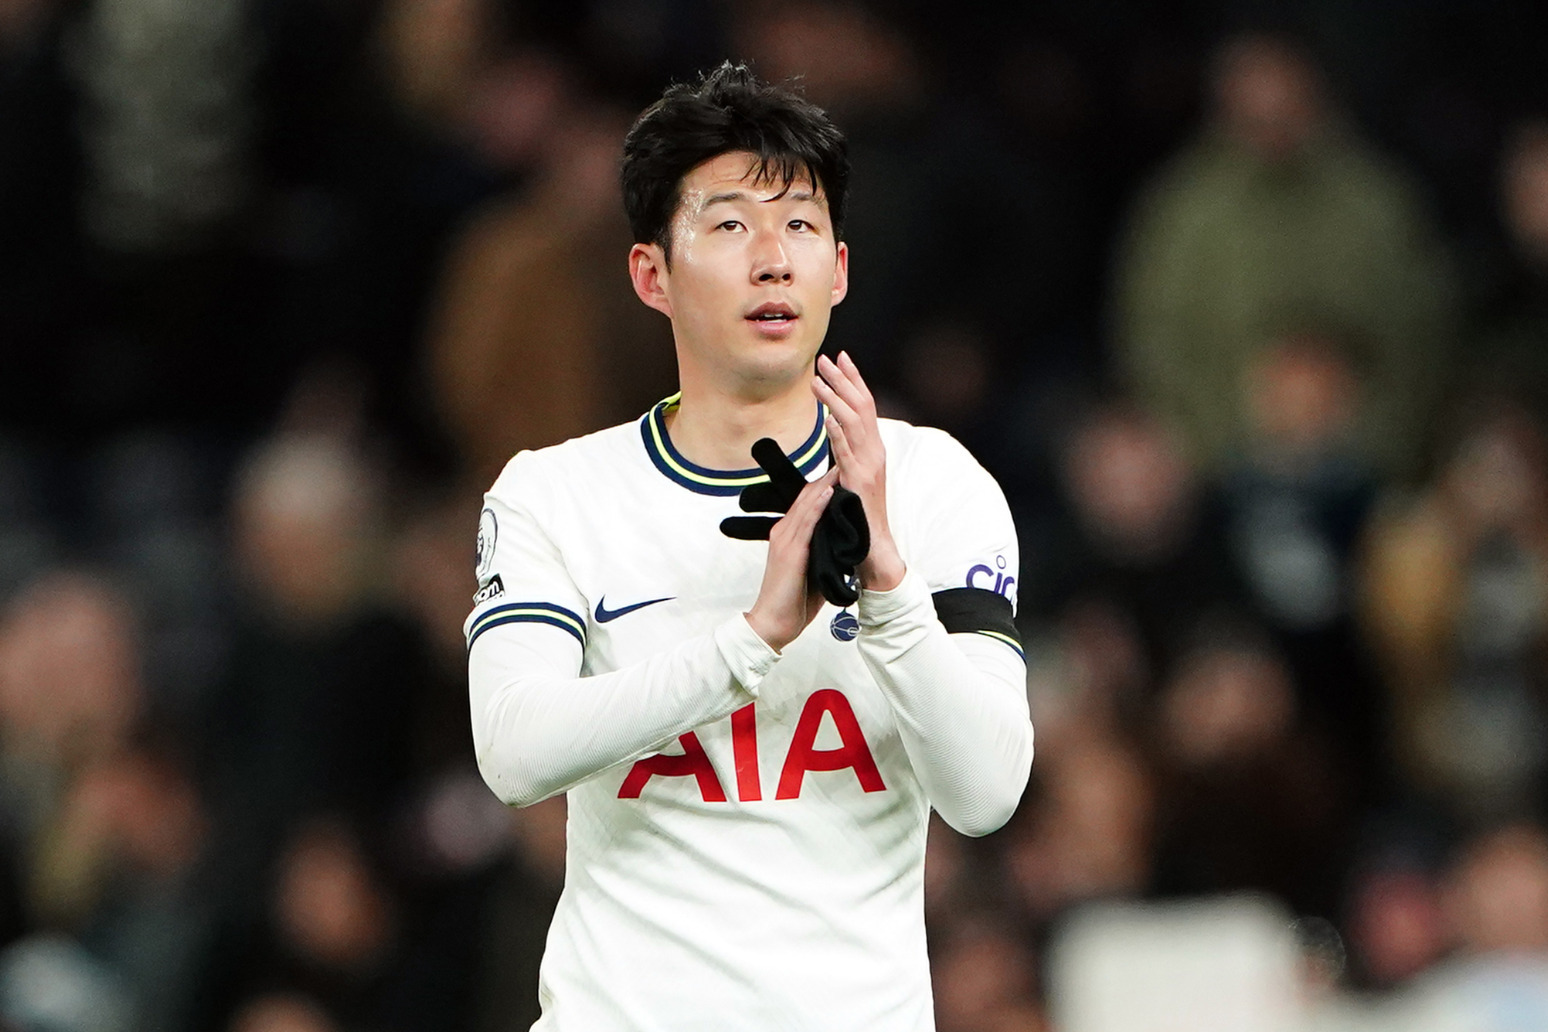 ‘Disgusted’ Kick It Out wants action after online racist abuse of Son Heung-min 